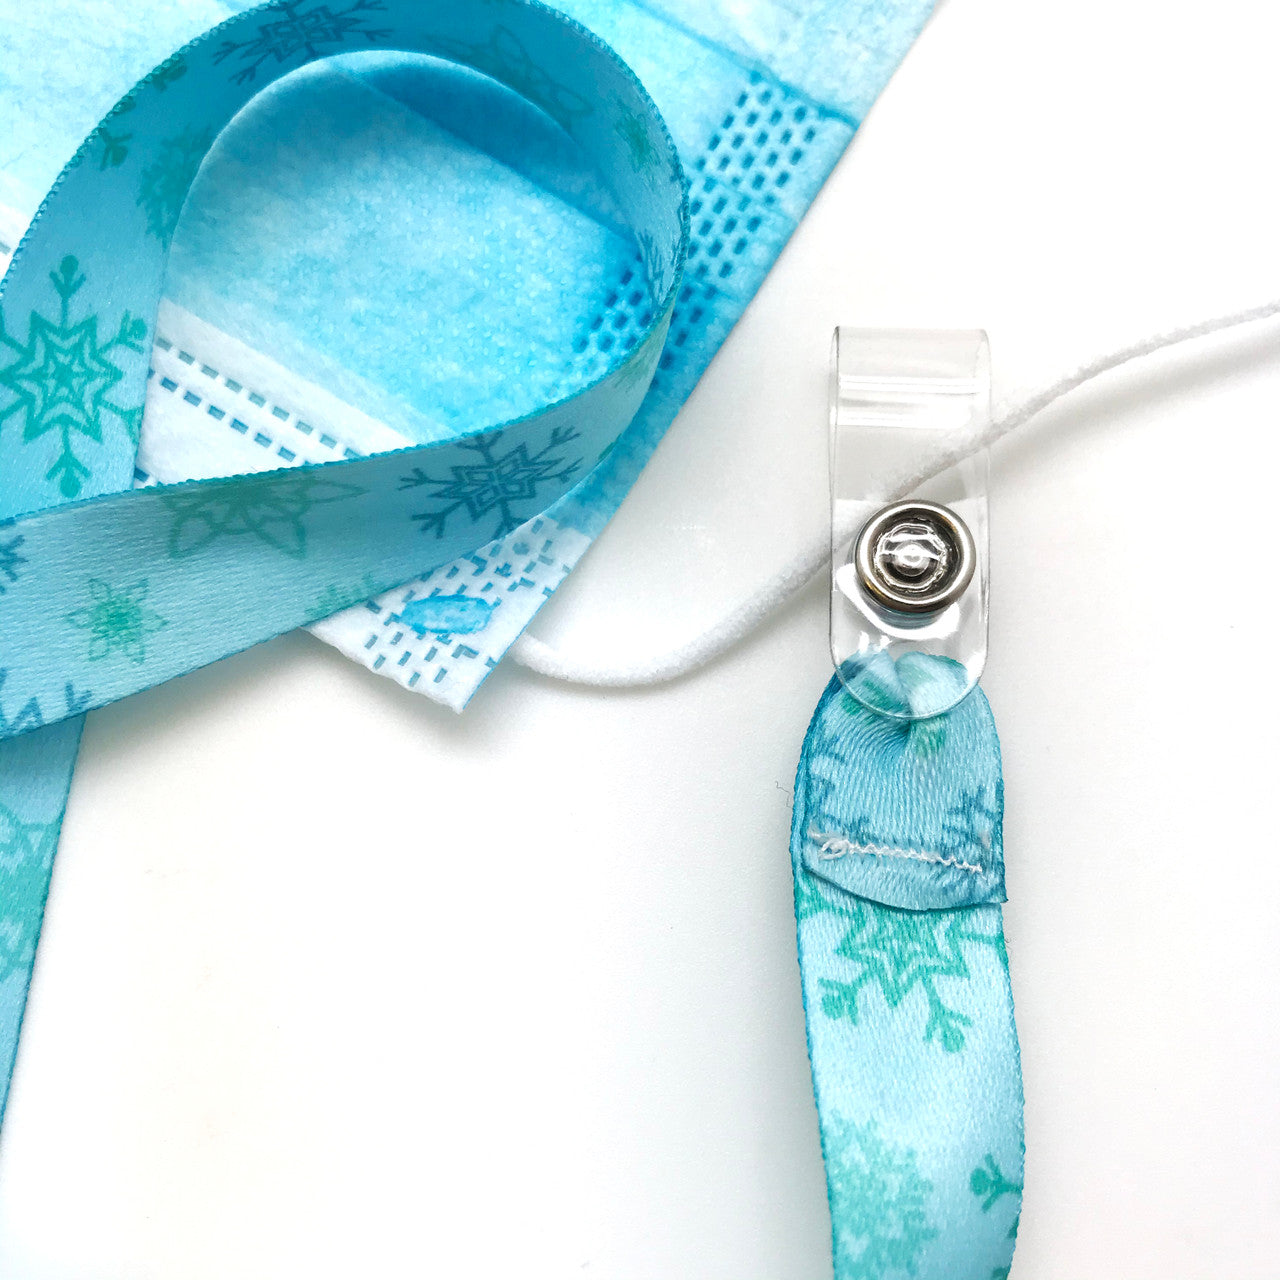 Frozen theme snowflakes Face mask holder lanyard 24" long  with vinyl  snap fittings printed on 5/8" Ultra Lanyard fabric